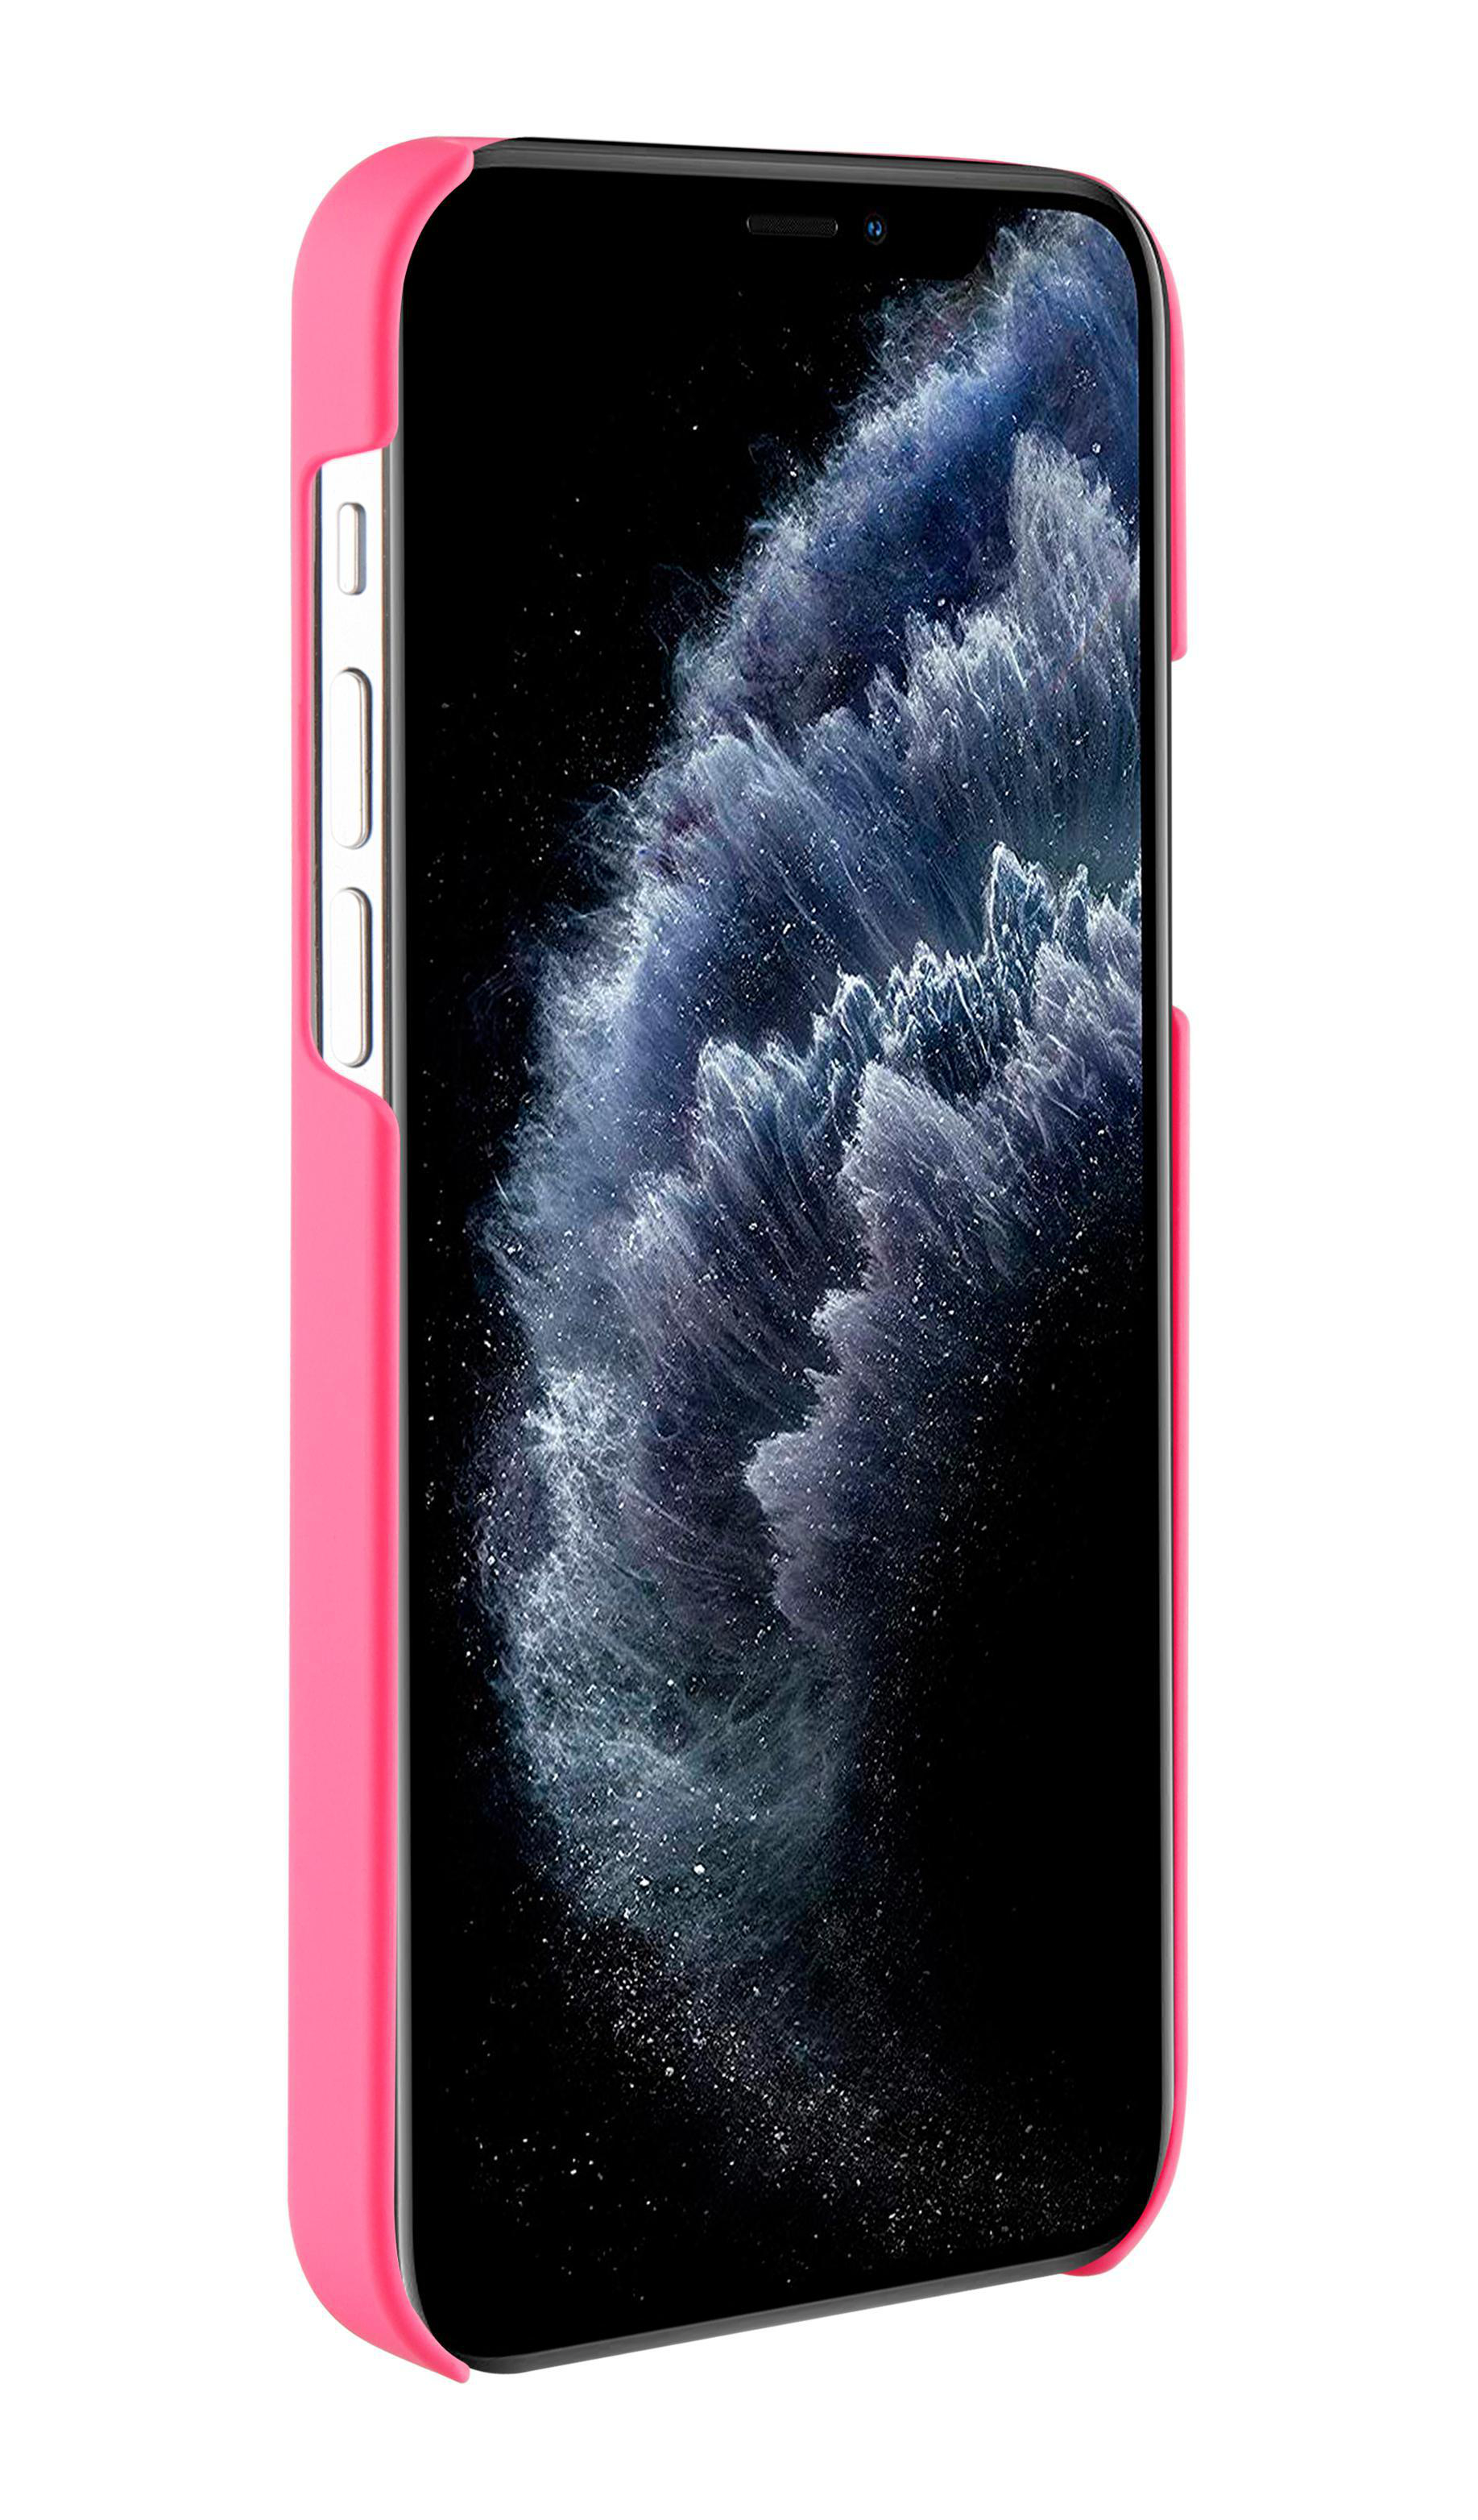 Backcover, iPhone iPhone 12 12, Gentle Cover, Pro, VIVANCO Apple, Pink